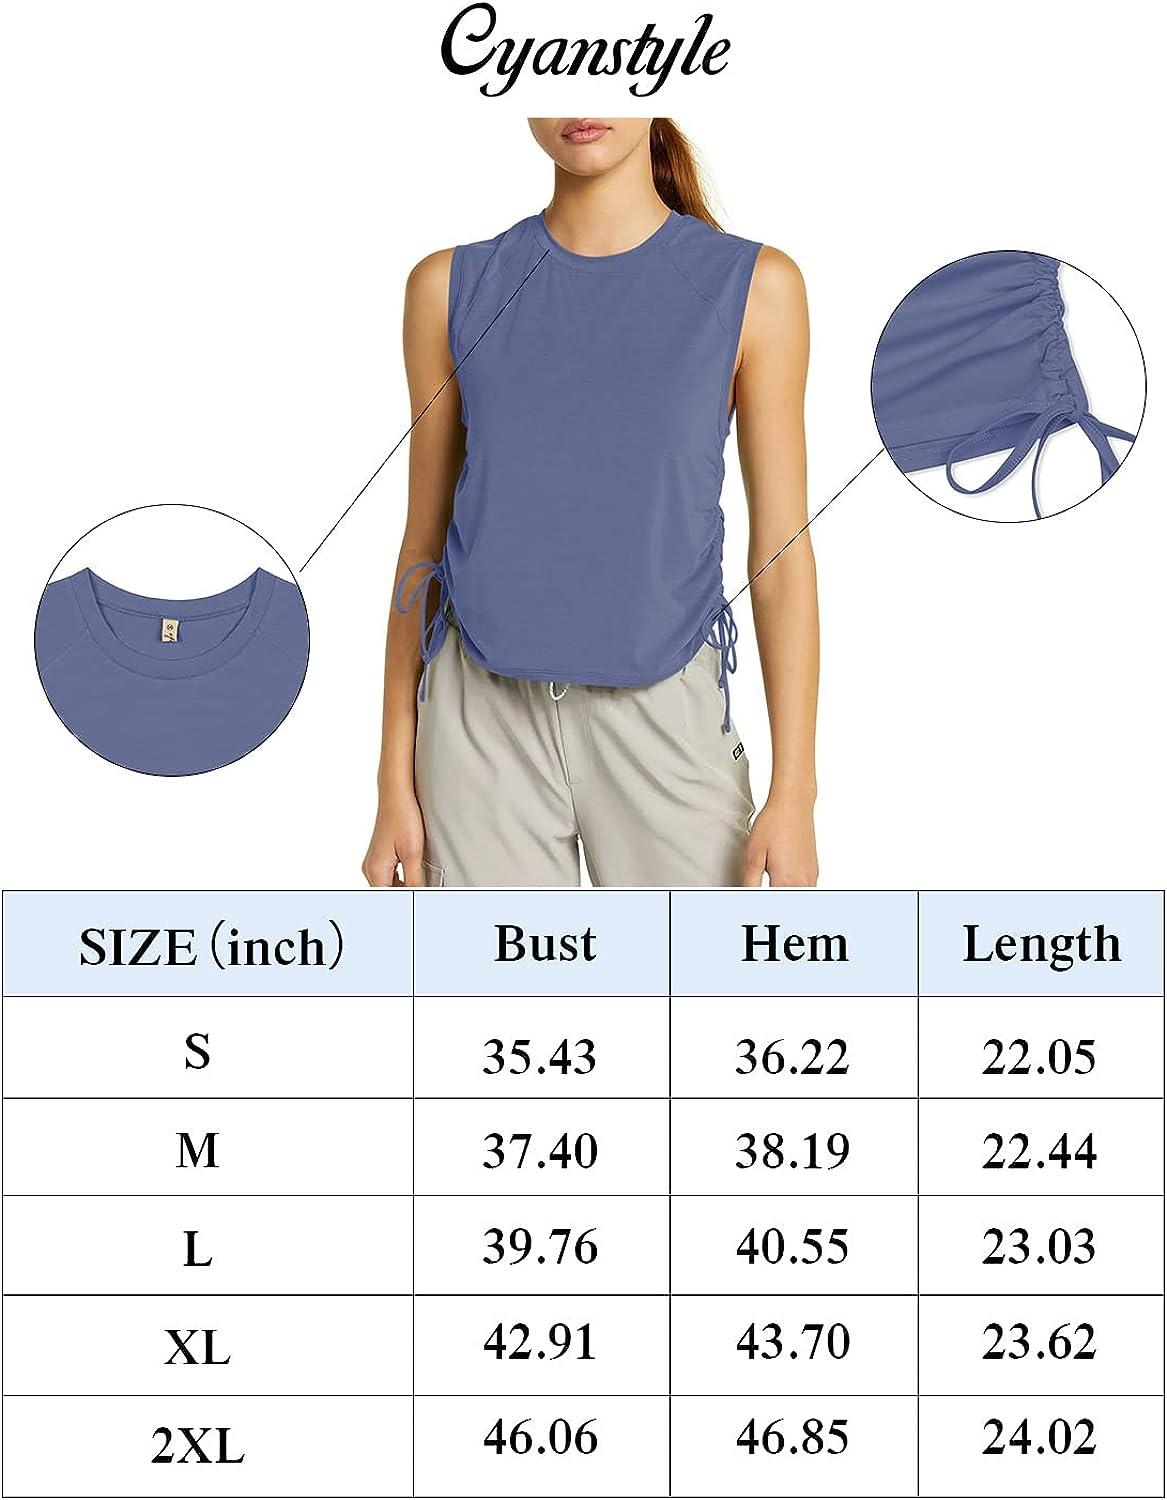 Cyanstyle Crop Top Workout Shirts for Women Sleeveless Yoga Tops